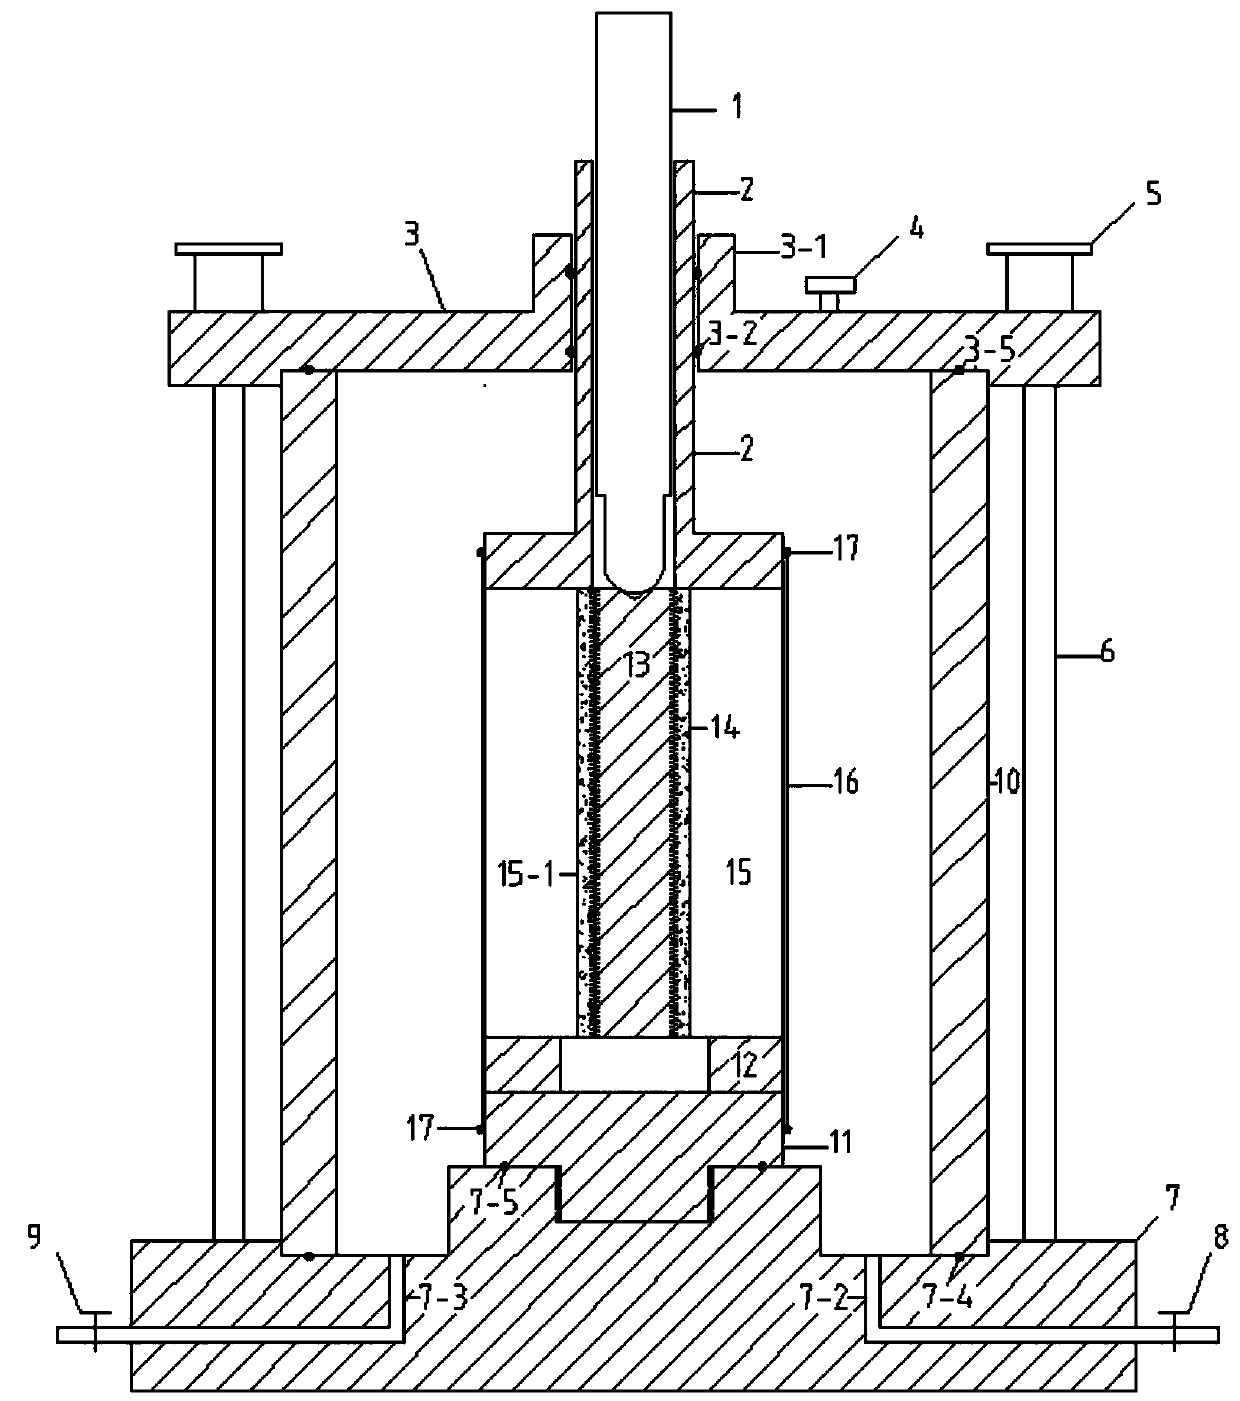 Rock side friction test device and method with controllable confining pressure